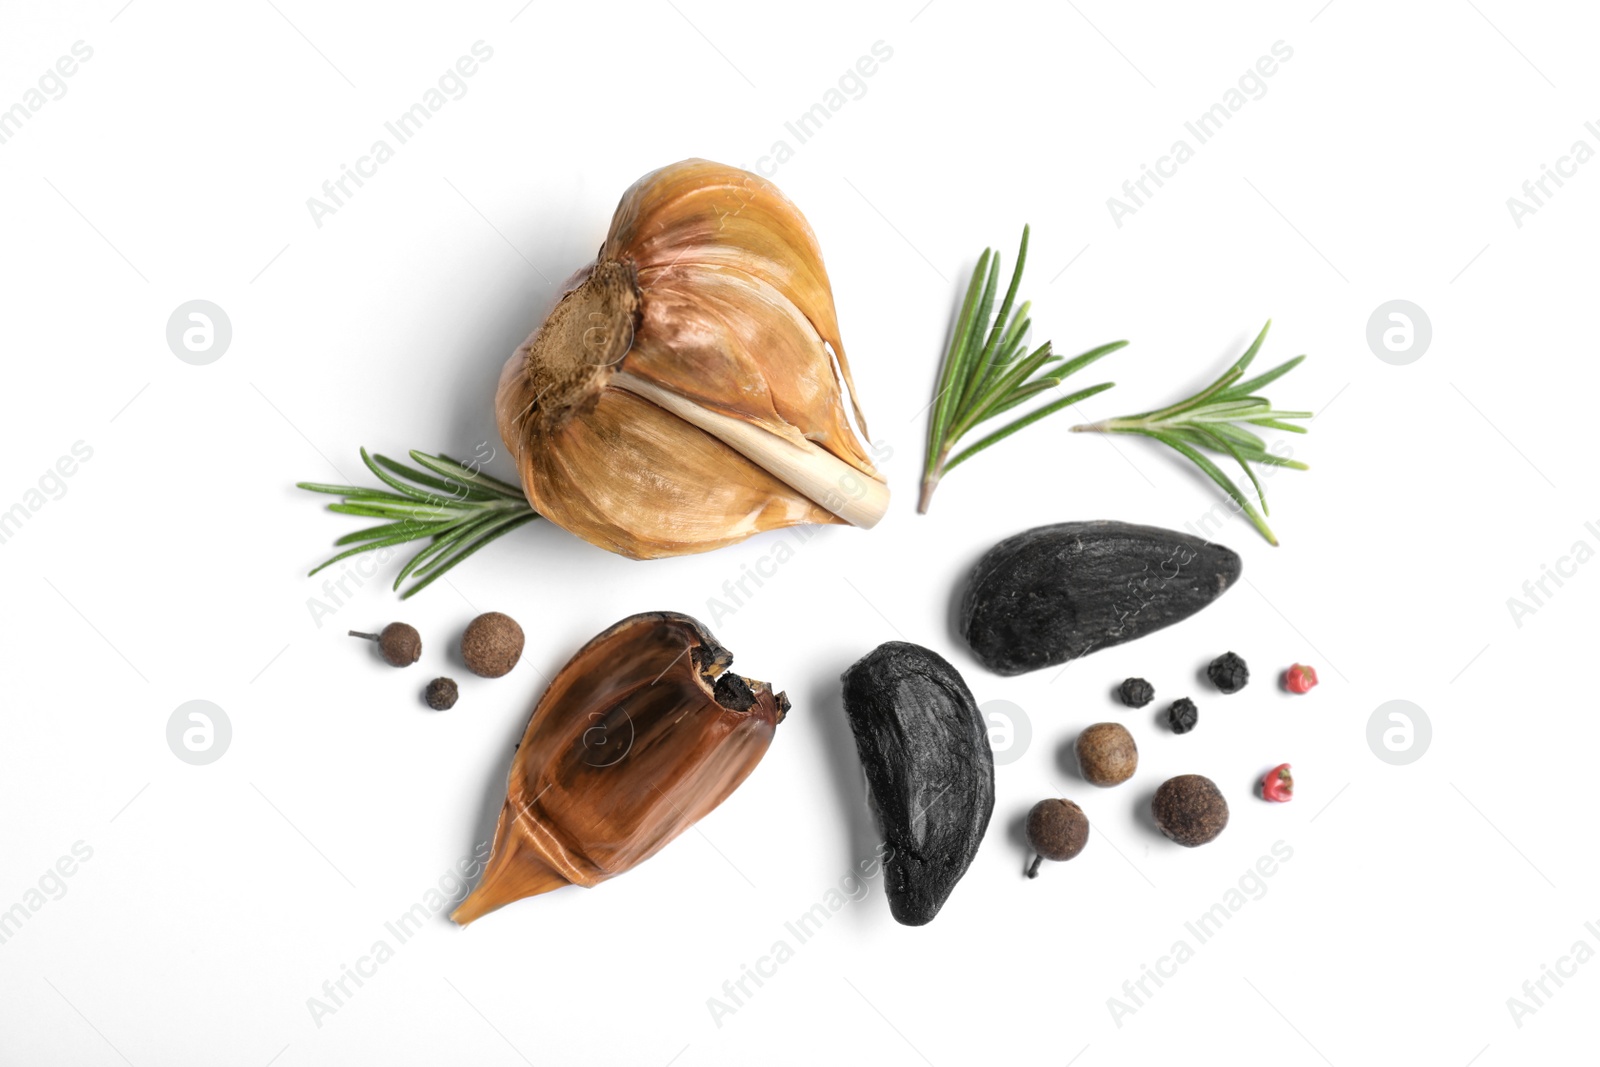 Photo of Aged black garlic with rosemary and peppercorns on white background, view from above